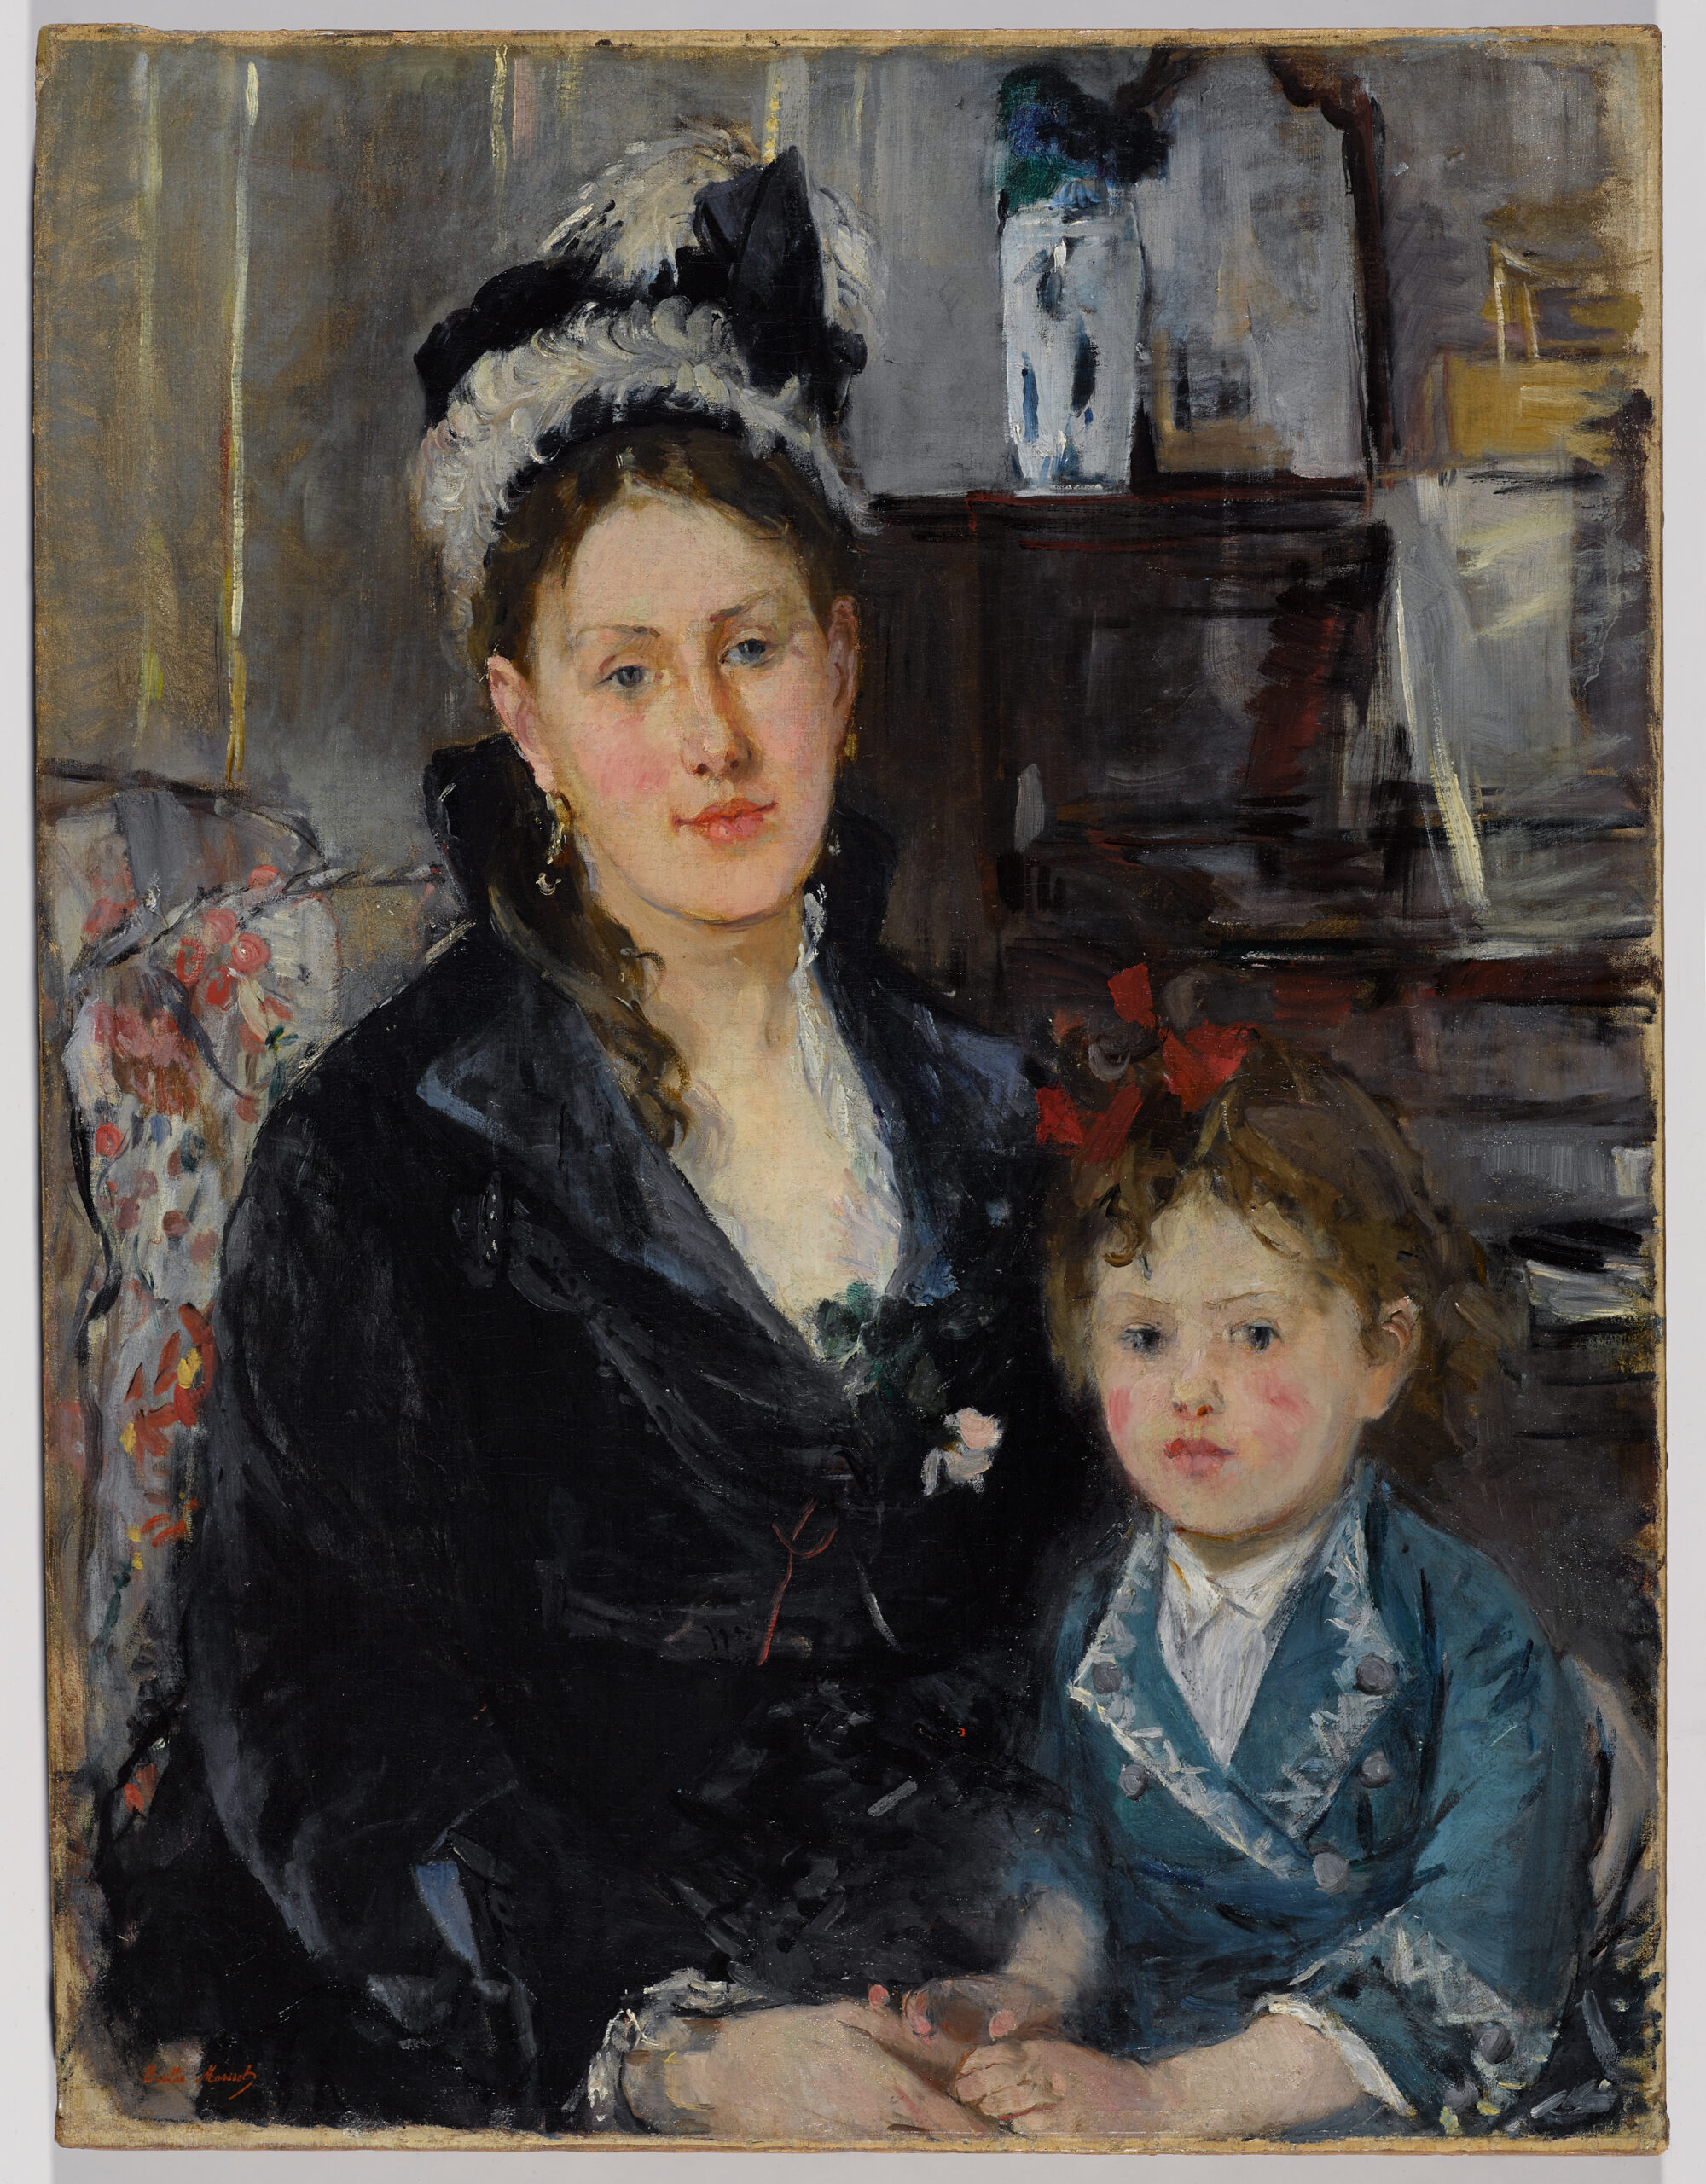 Painting of a woman holding a child on her lap